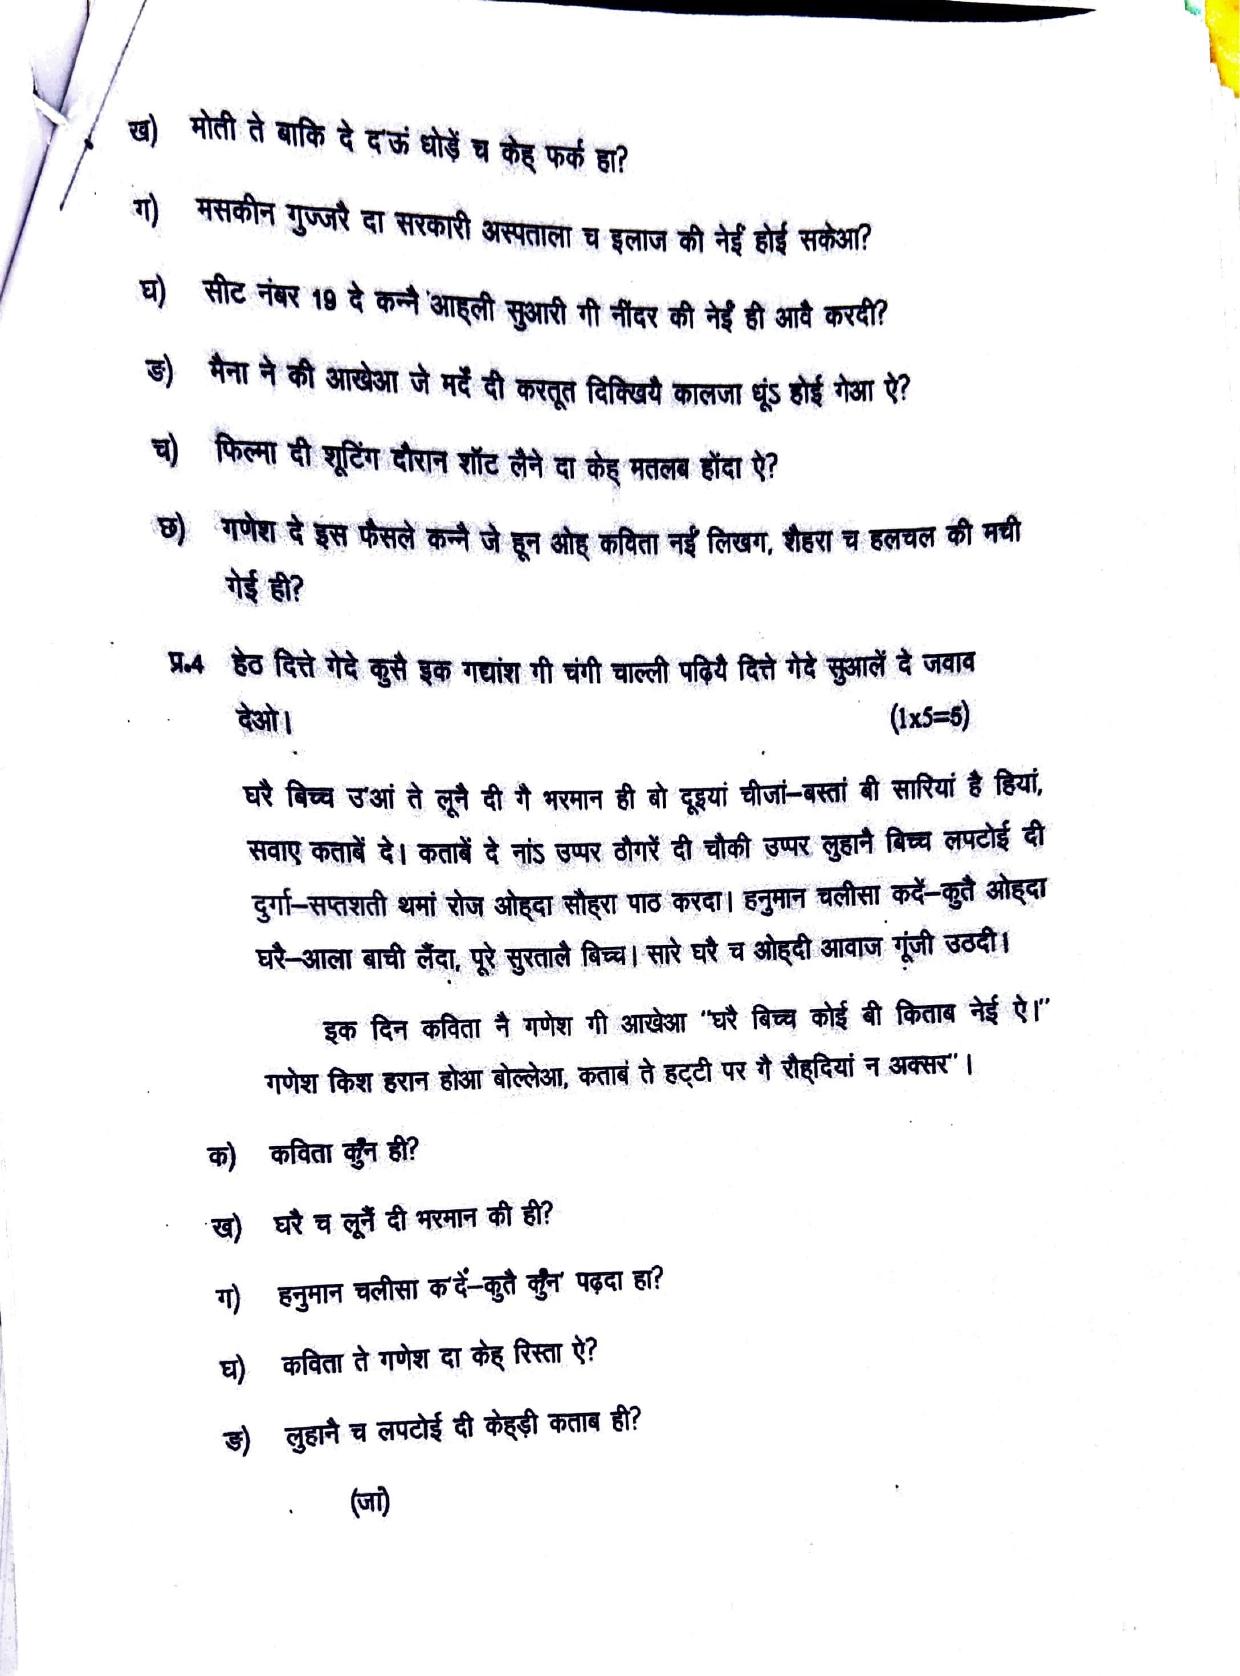 JKBOSE Class 12 Dogri Model Question Paper - Page 2